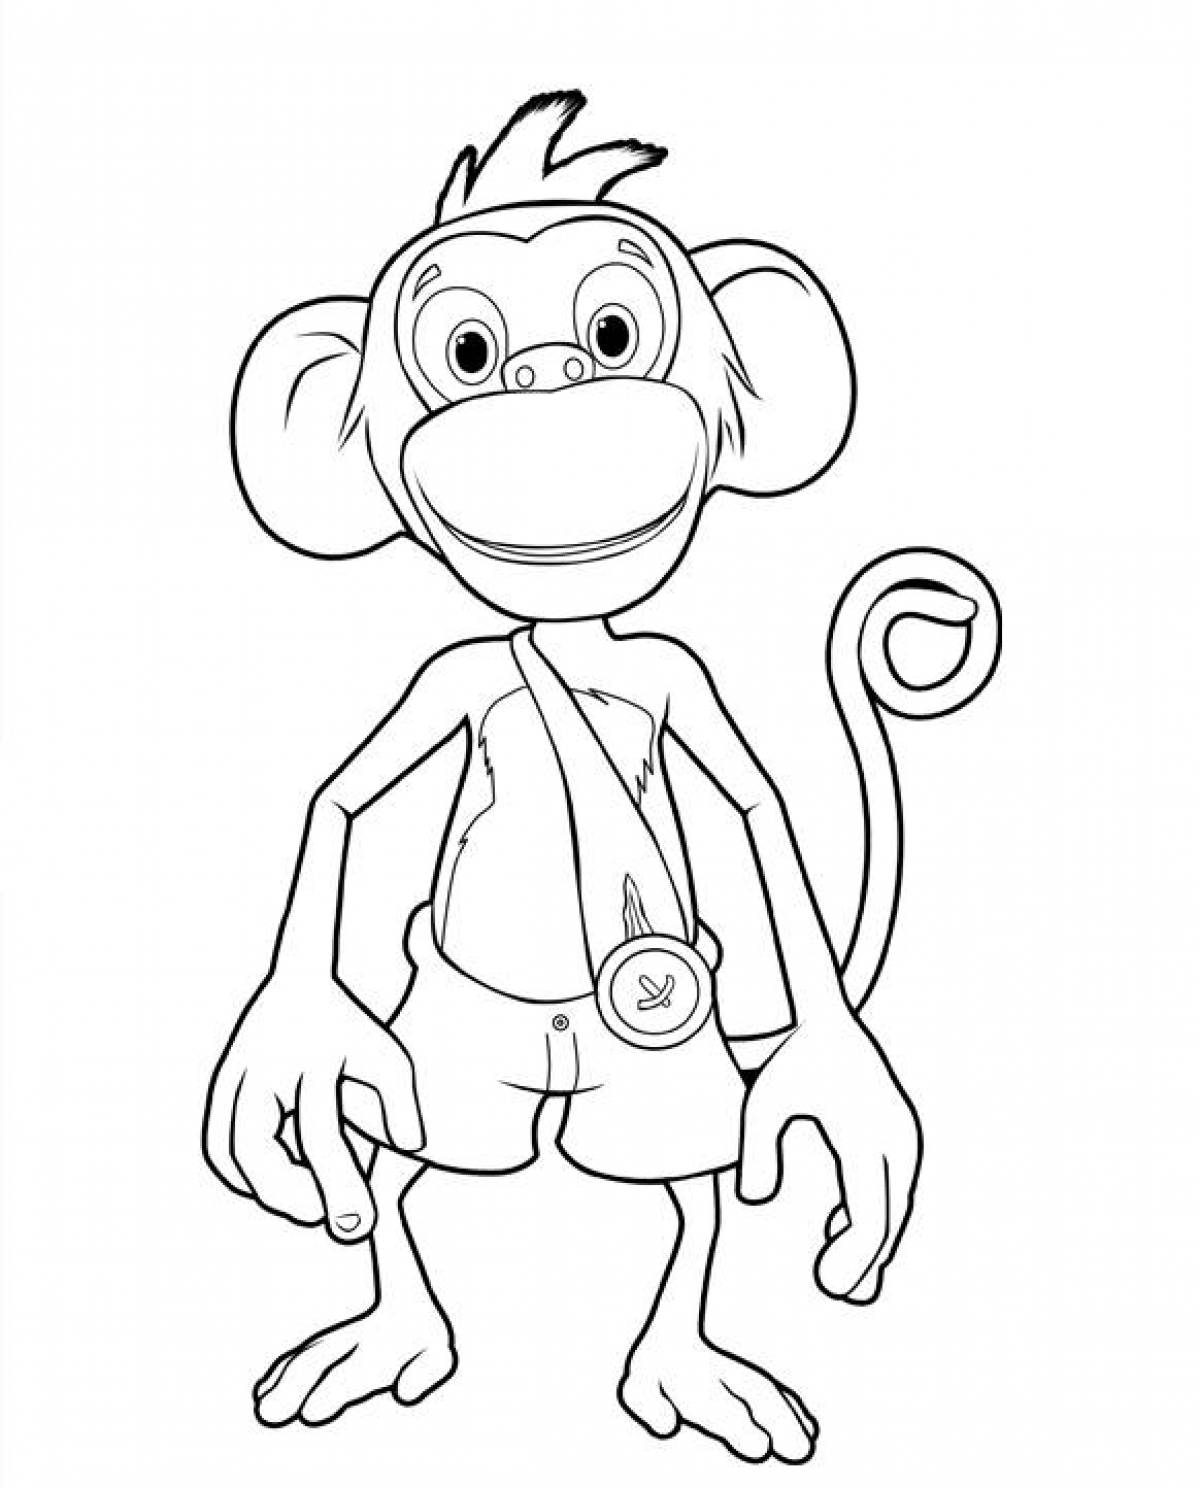 Monty's amazing coloring page